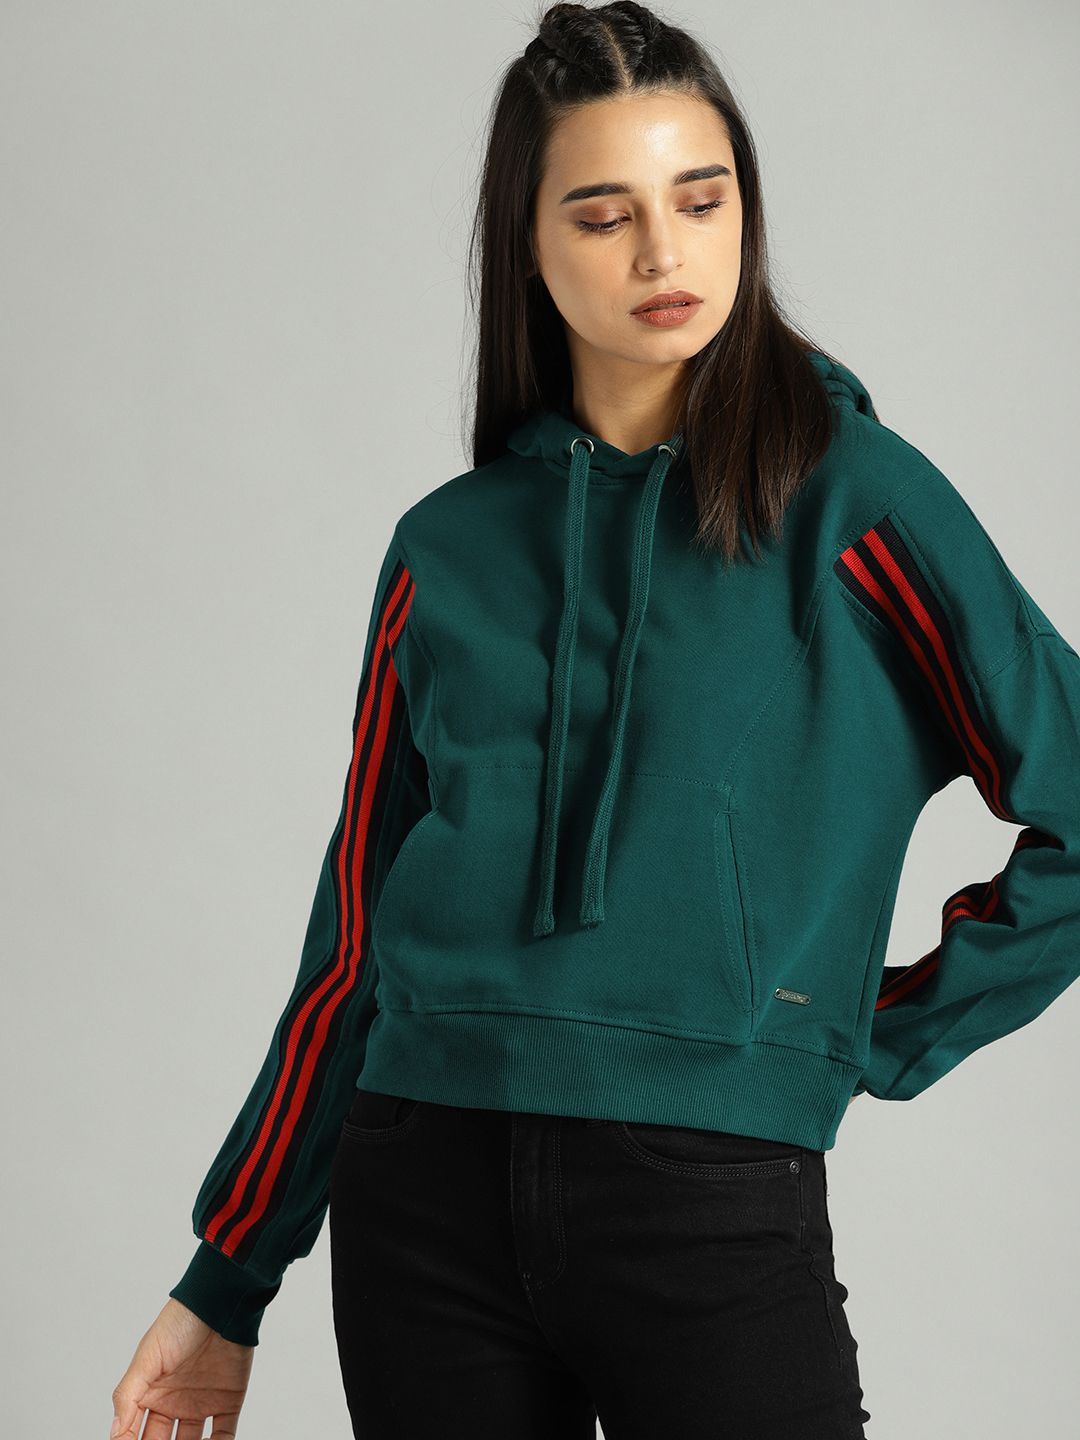 The Roadster Lifestyle Co Women Green Solid Hooded Sweatshirt Price in India